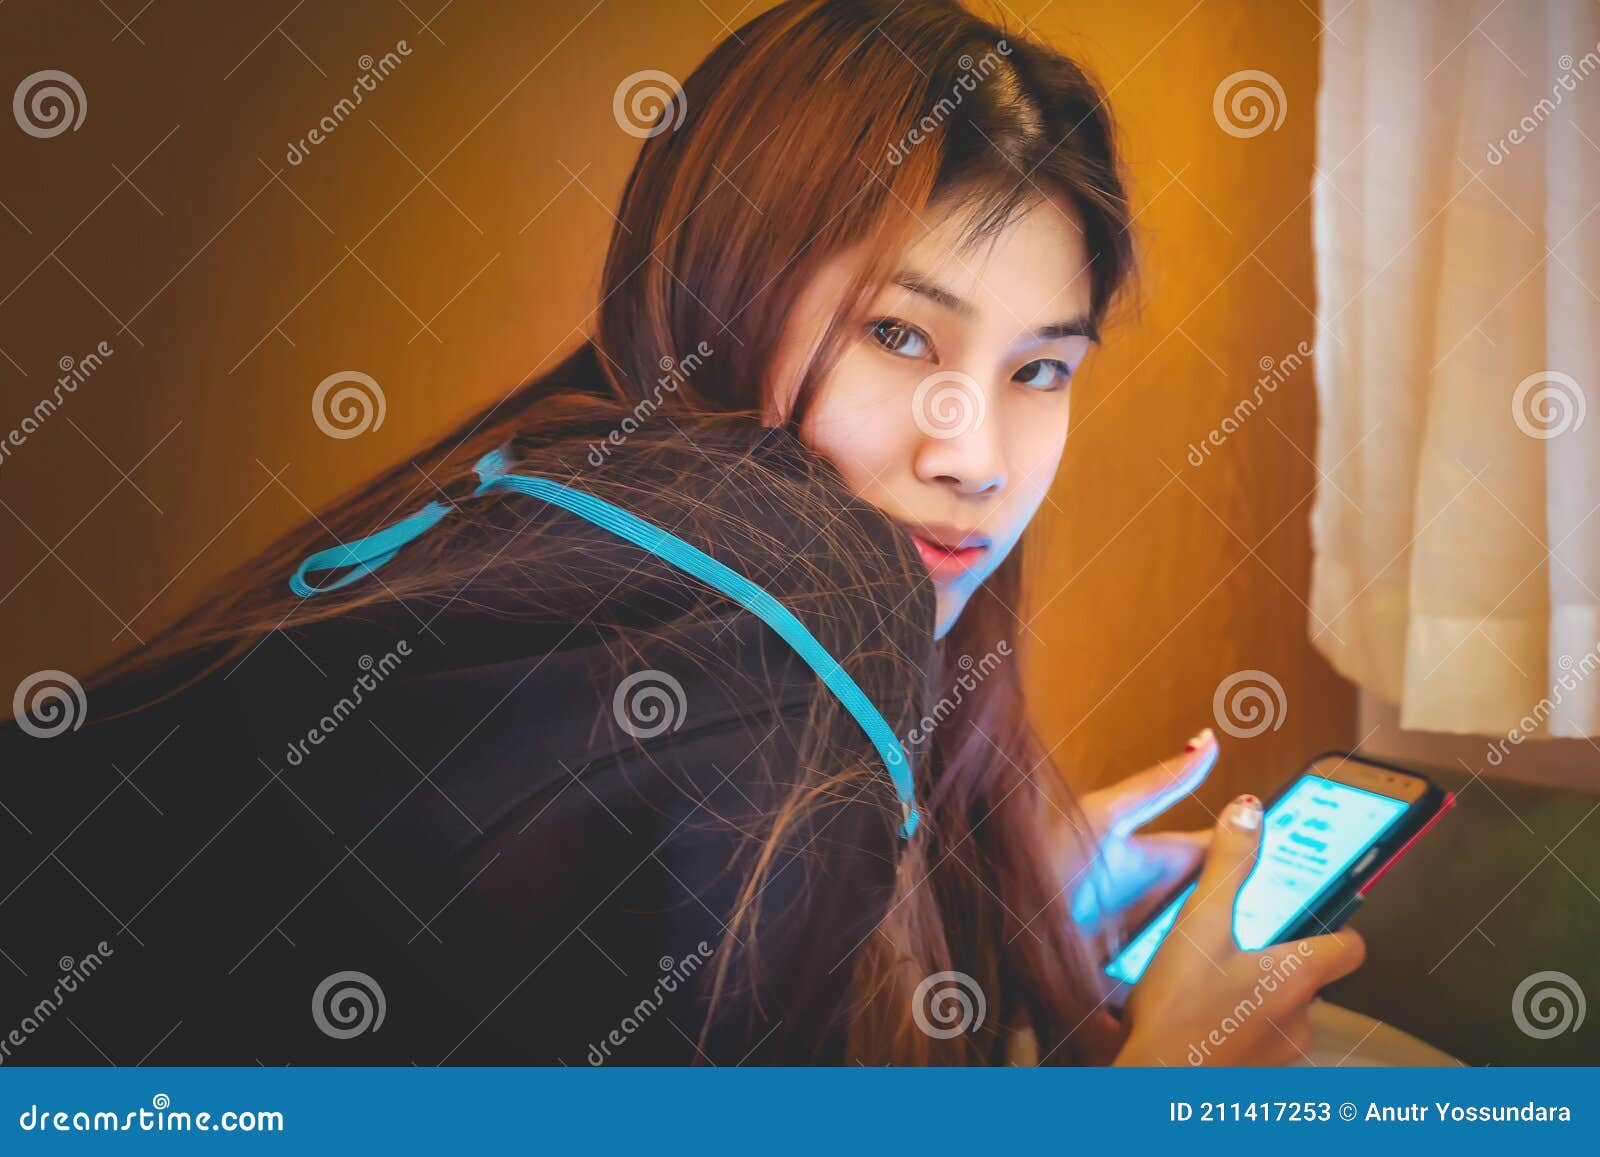 Asian Woman Using Mobile Phone On The Bed While Turn Around And Looking At The Camera Stock